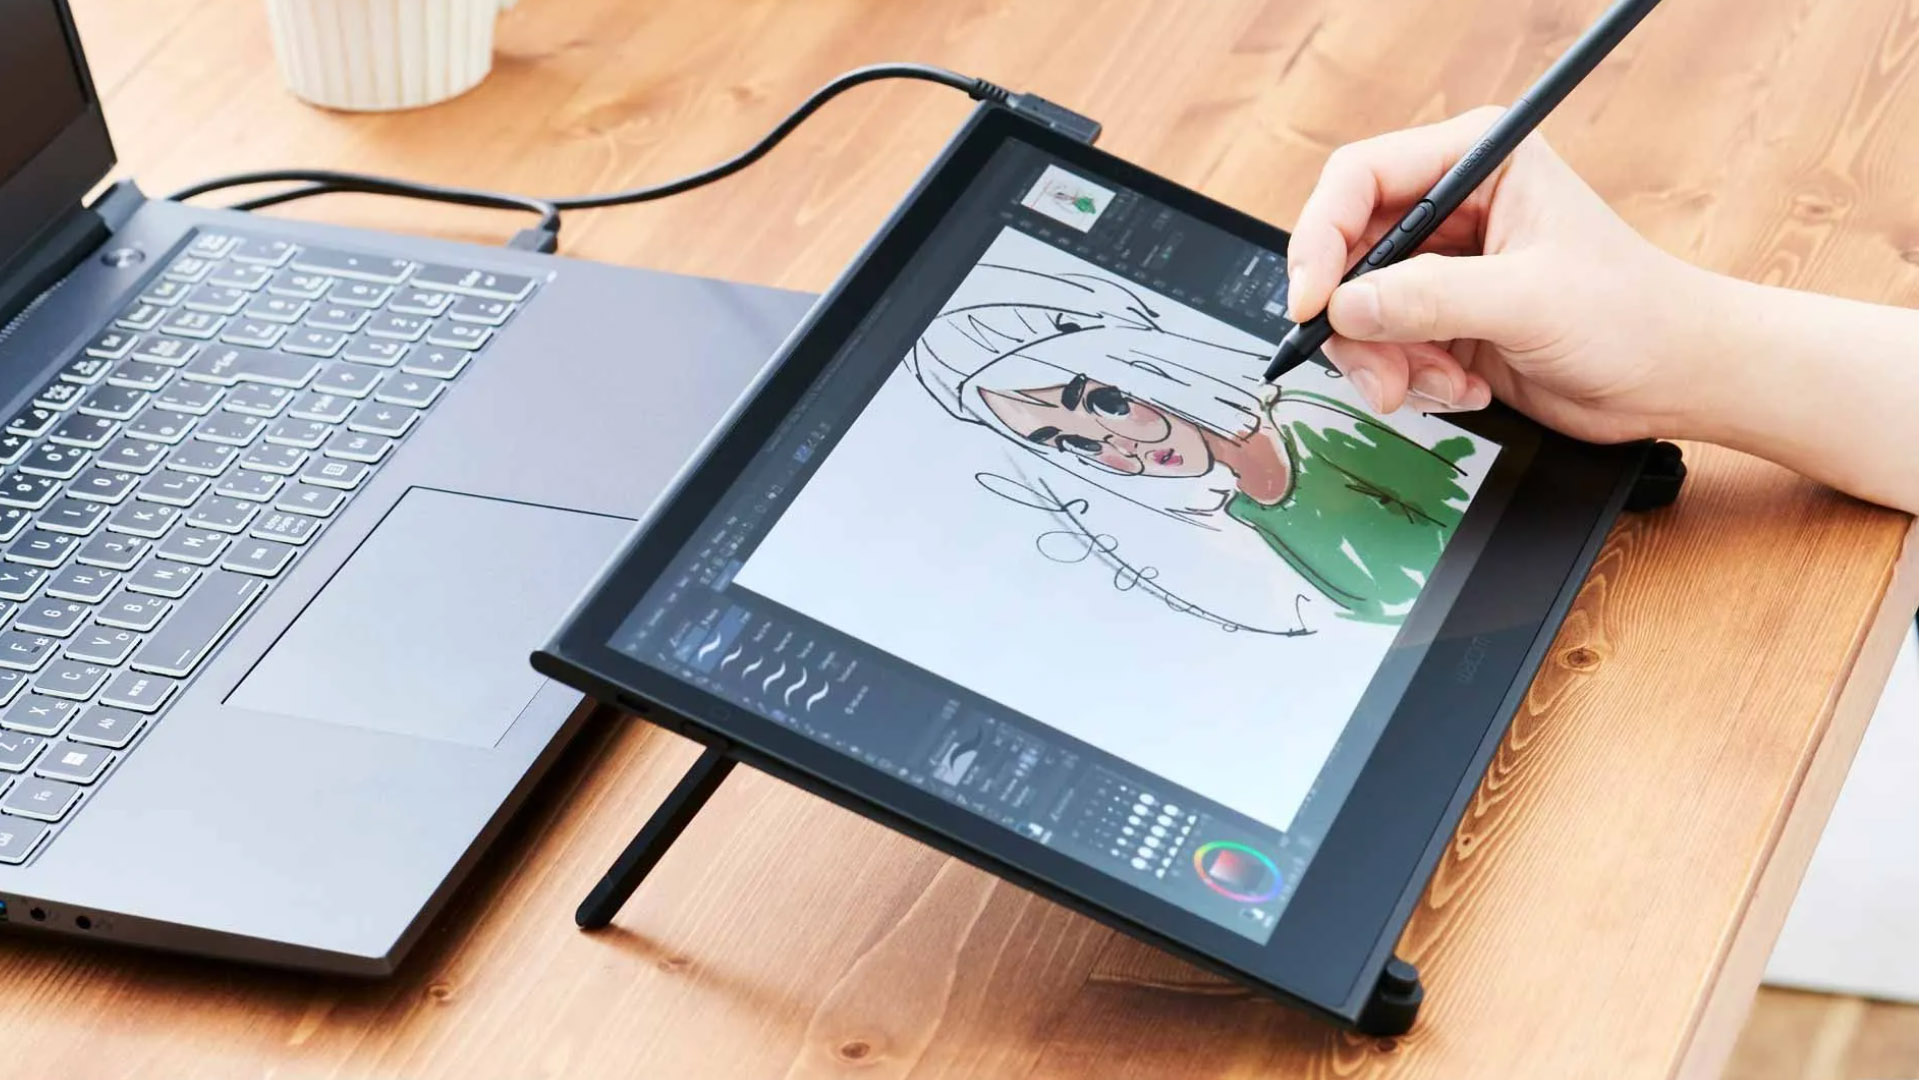 Wacom’s first OLED pill is intended for drawing on the hump